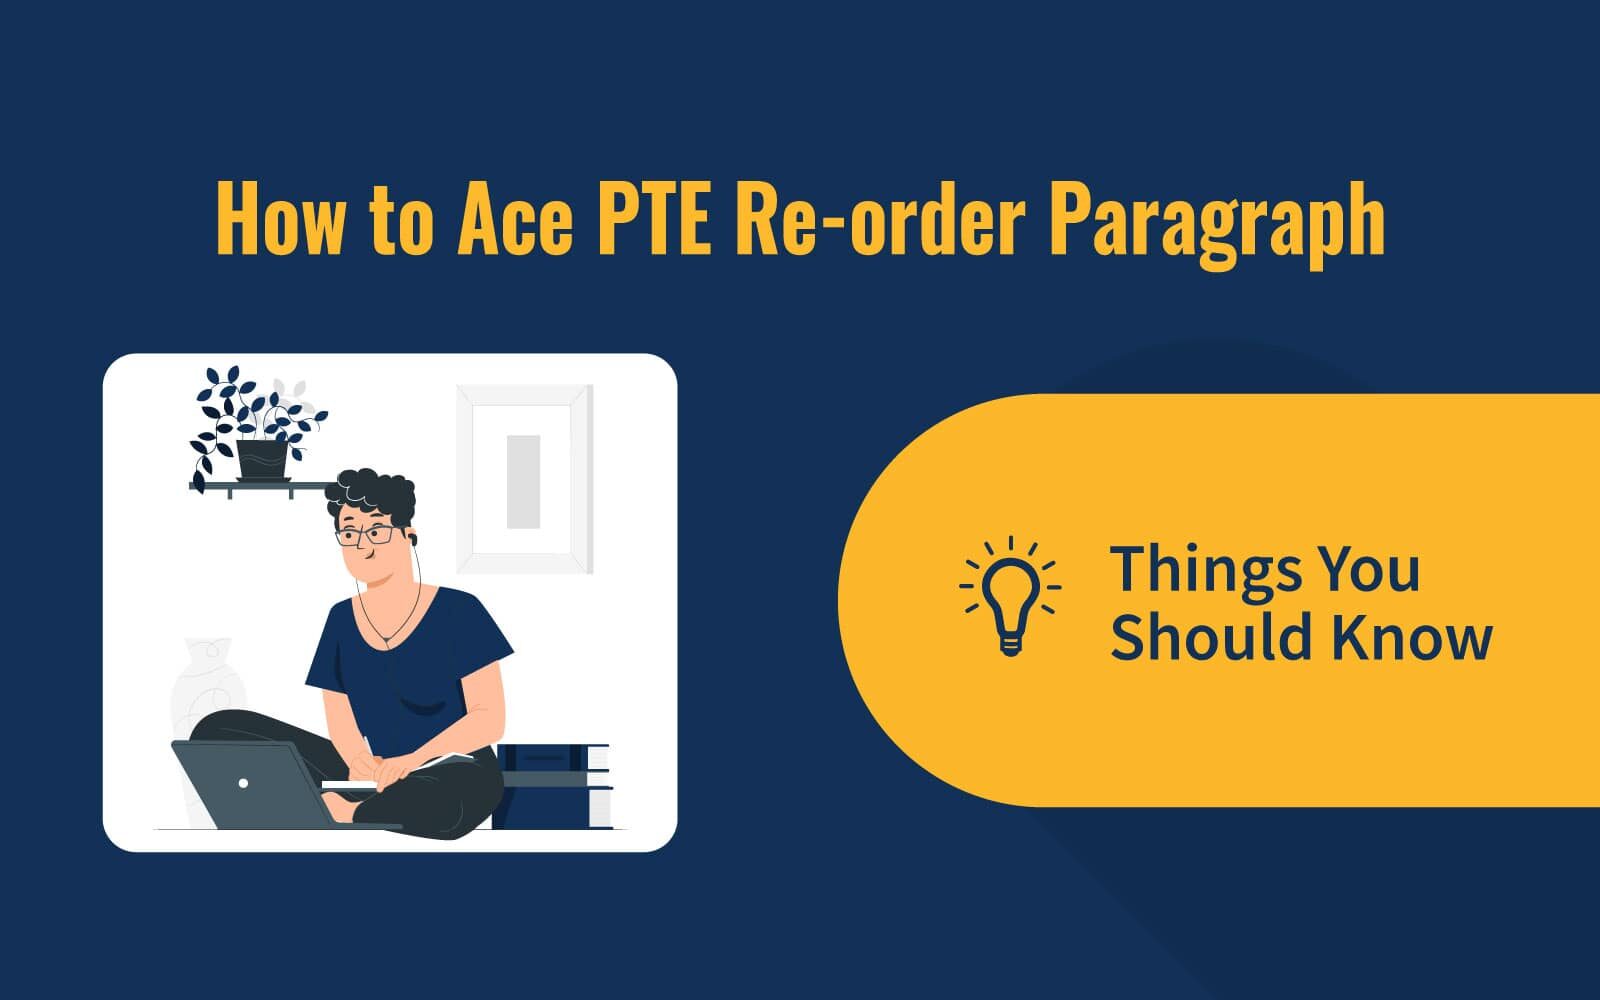 How to Ace PTE Re-order Paragraph